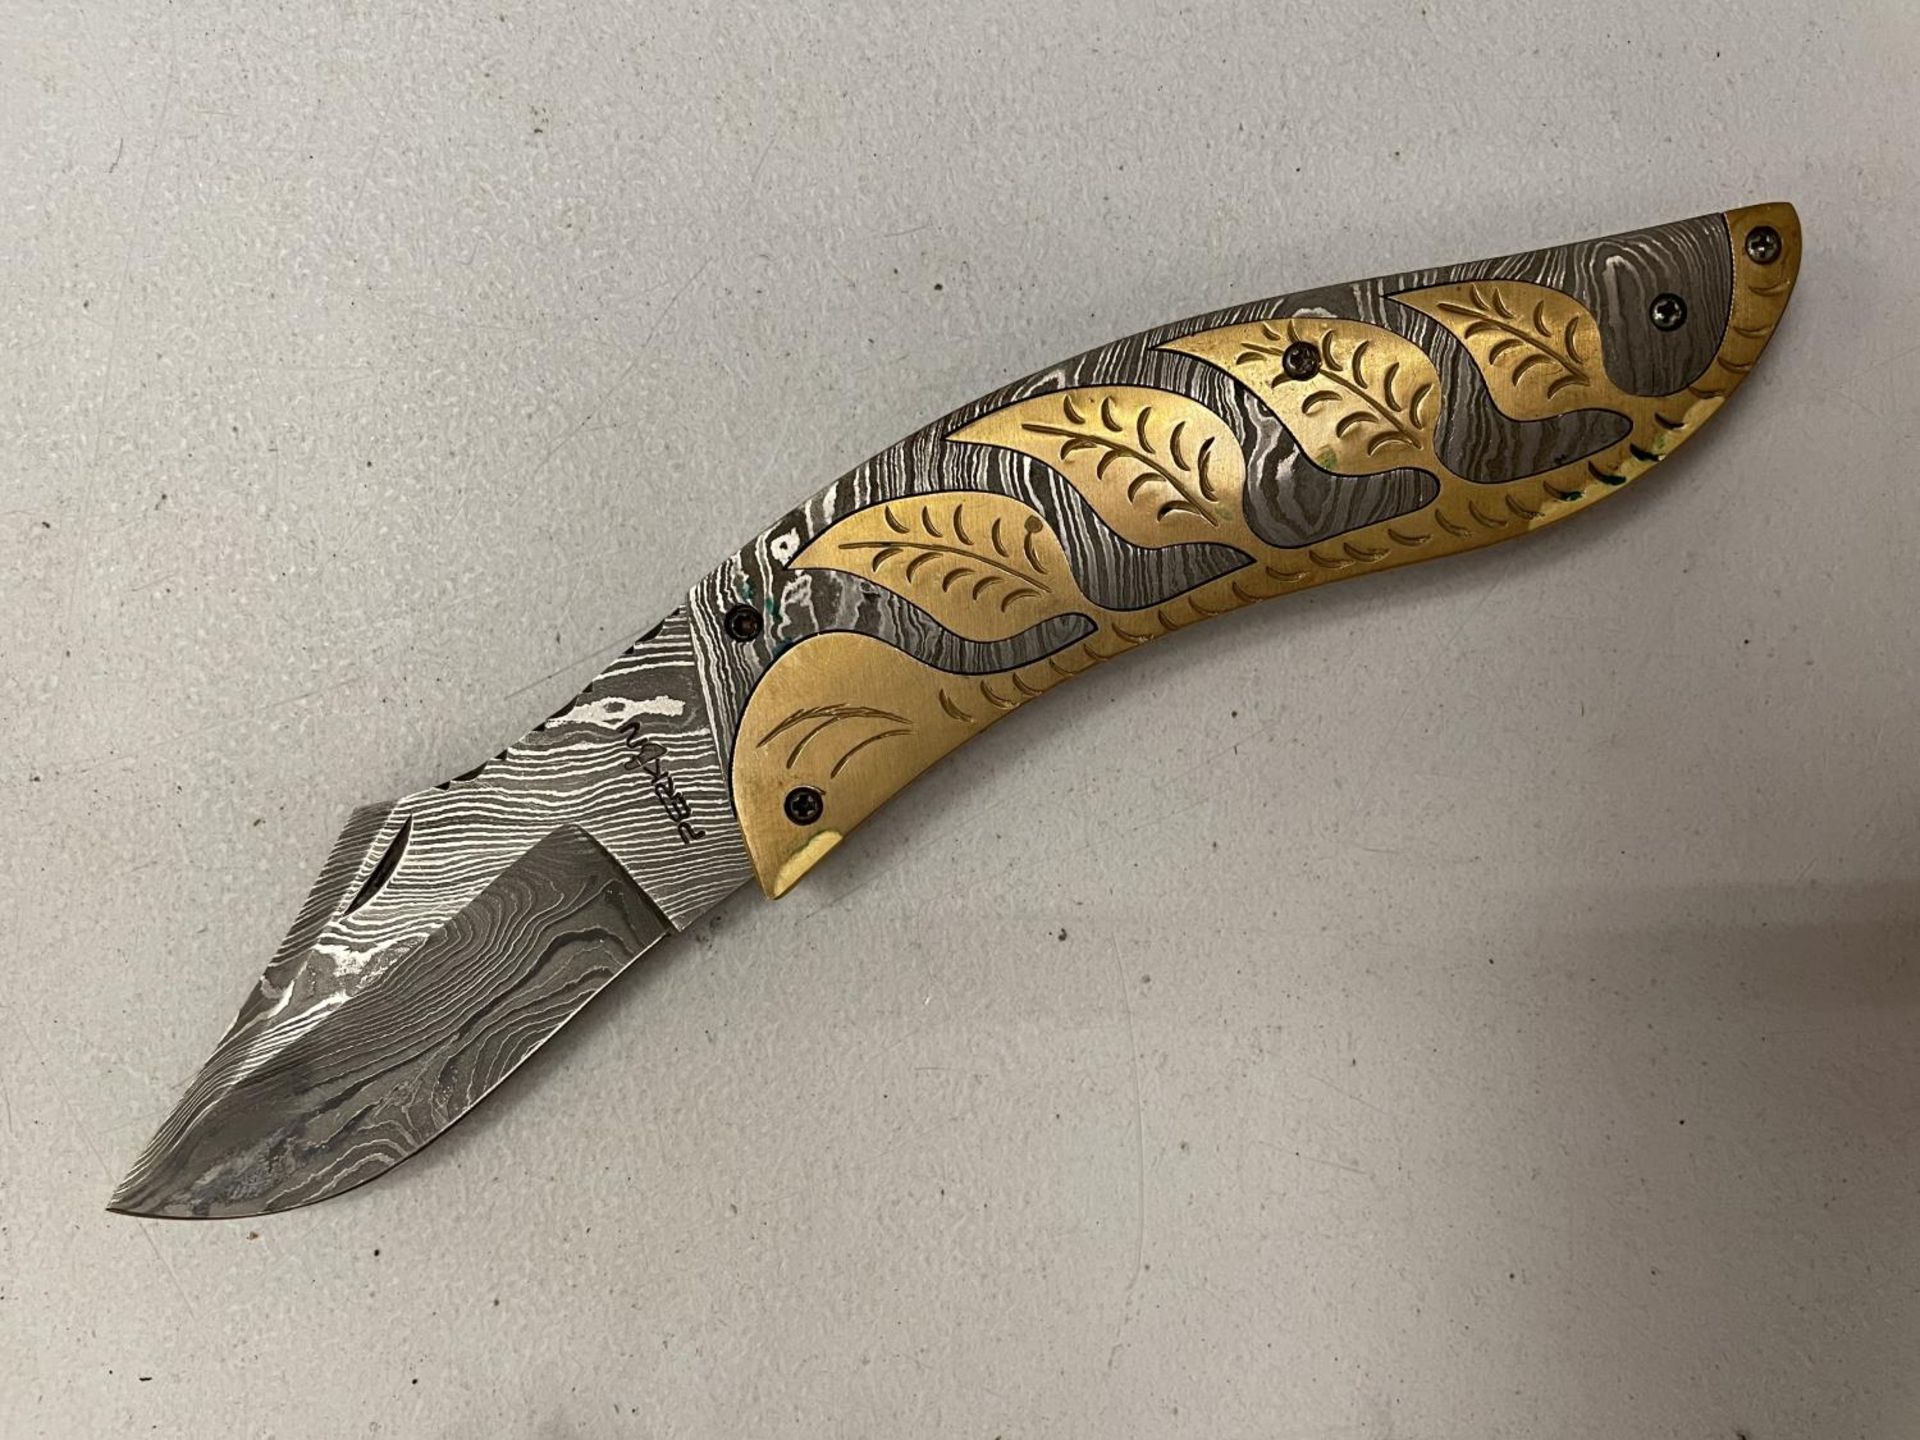 AN ORNATE 'PERKIN' SINGLE BLADED FOLDING POCKET KNIFE WITH DAMASCUS BLADE - Image 2 of 3